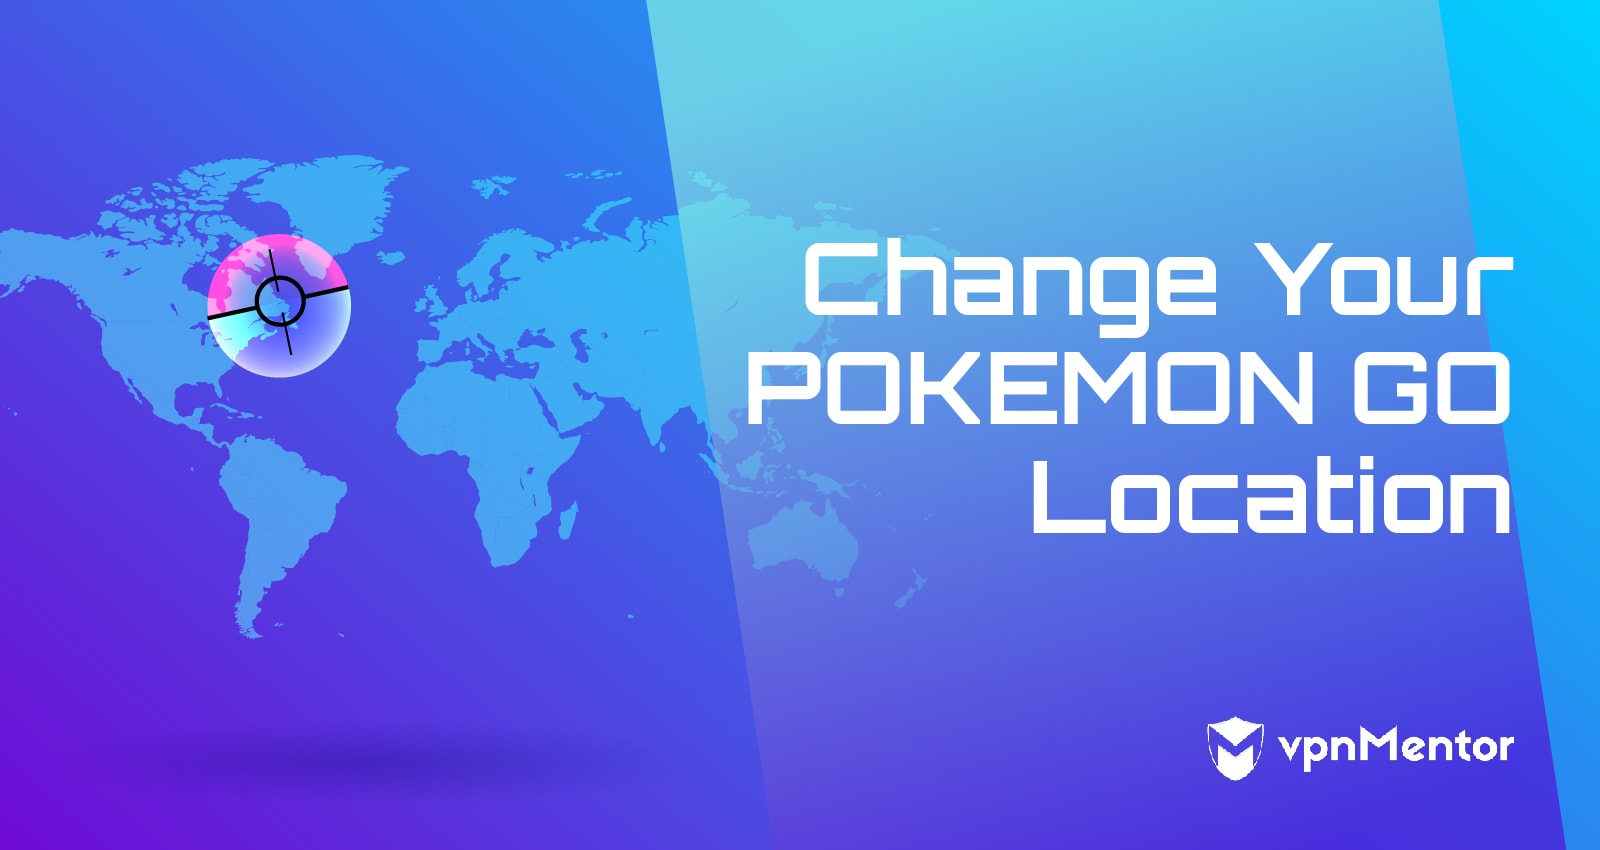 How to Change Location in Pokemon GO in 2023: Reliable Hack